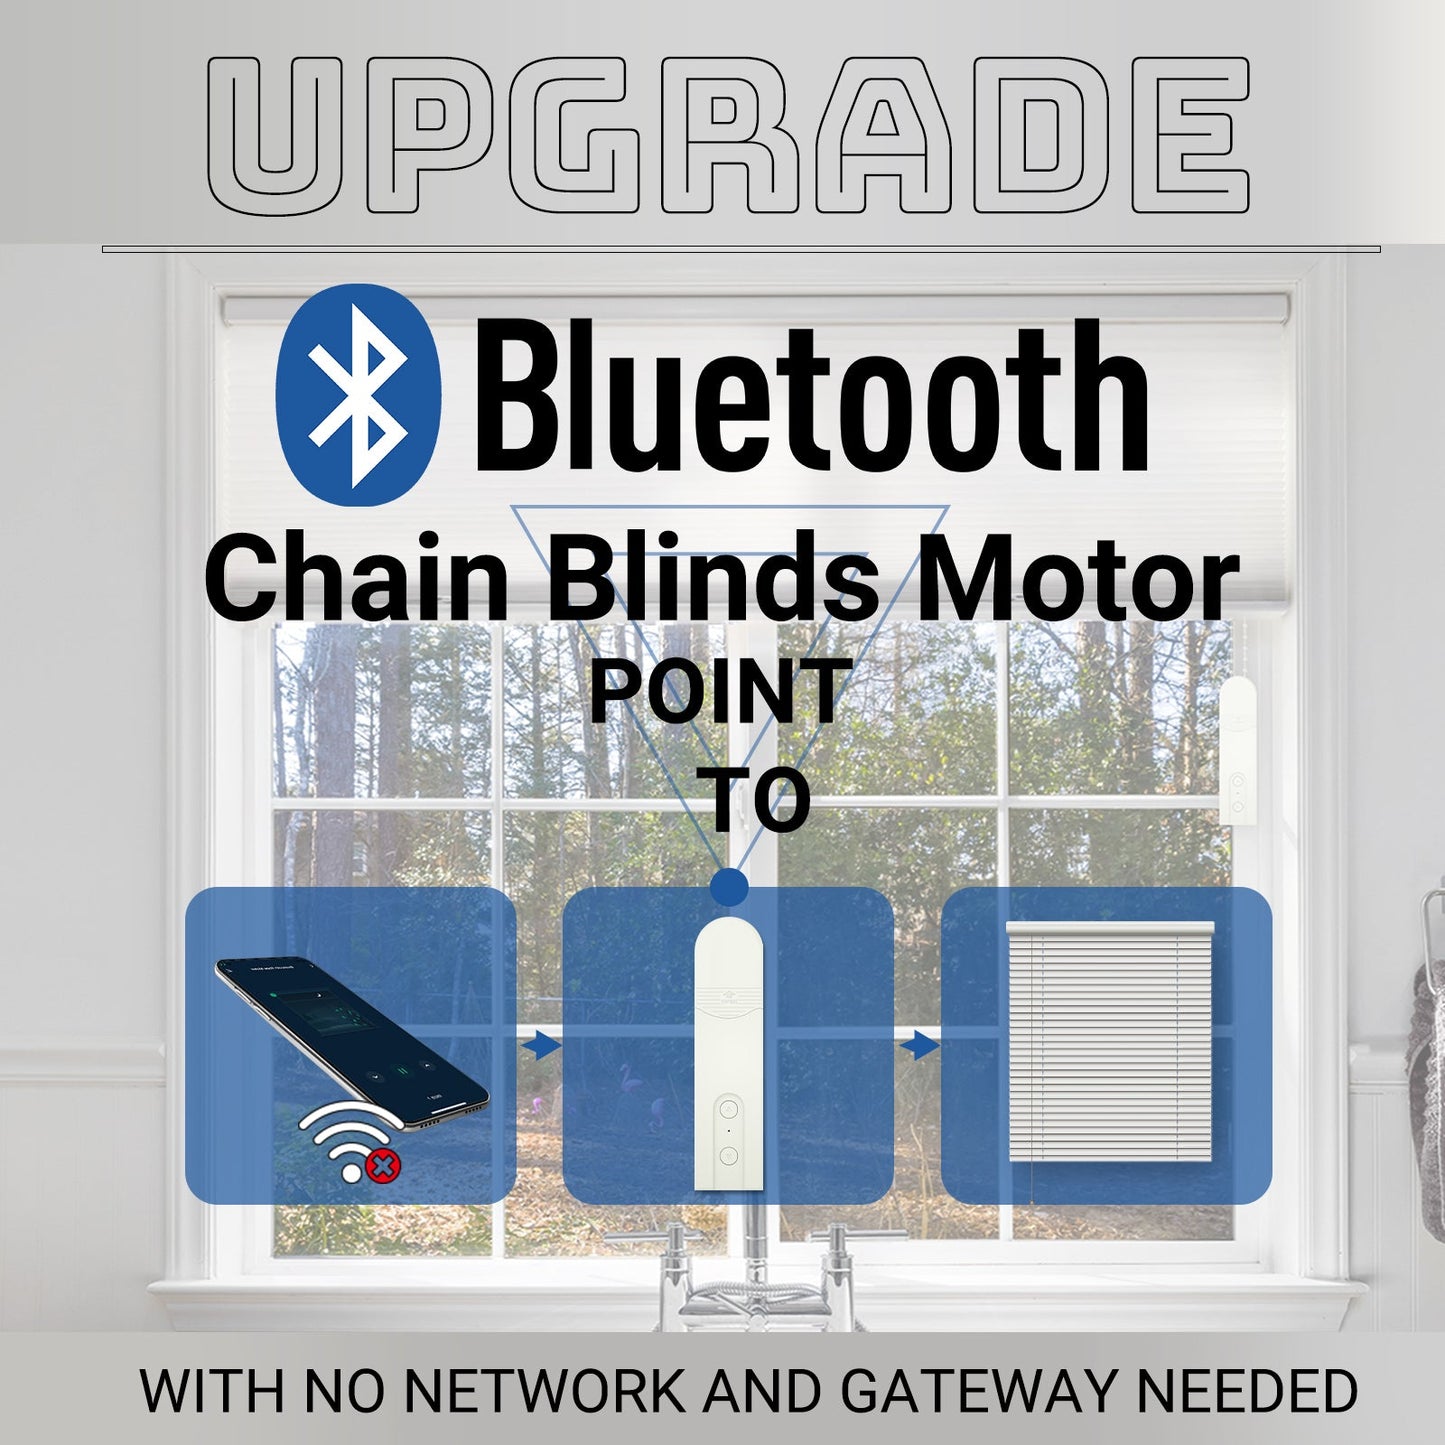 bluetooth chain blinds motor point to with no network and gateway needed - MOES